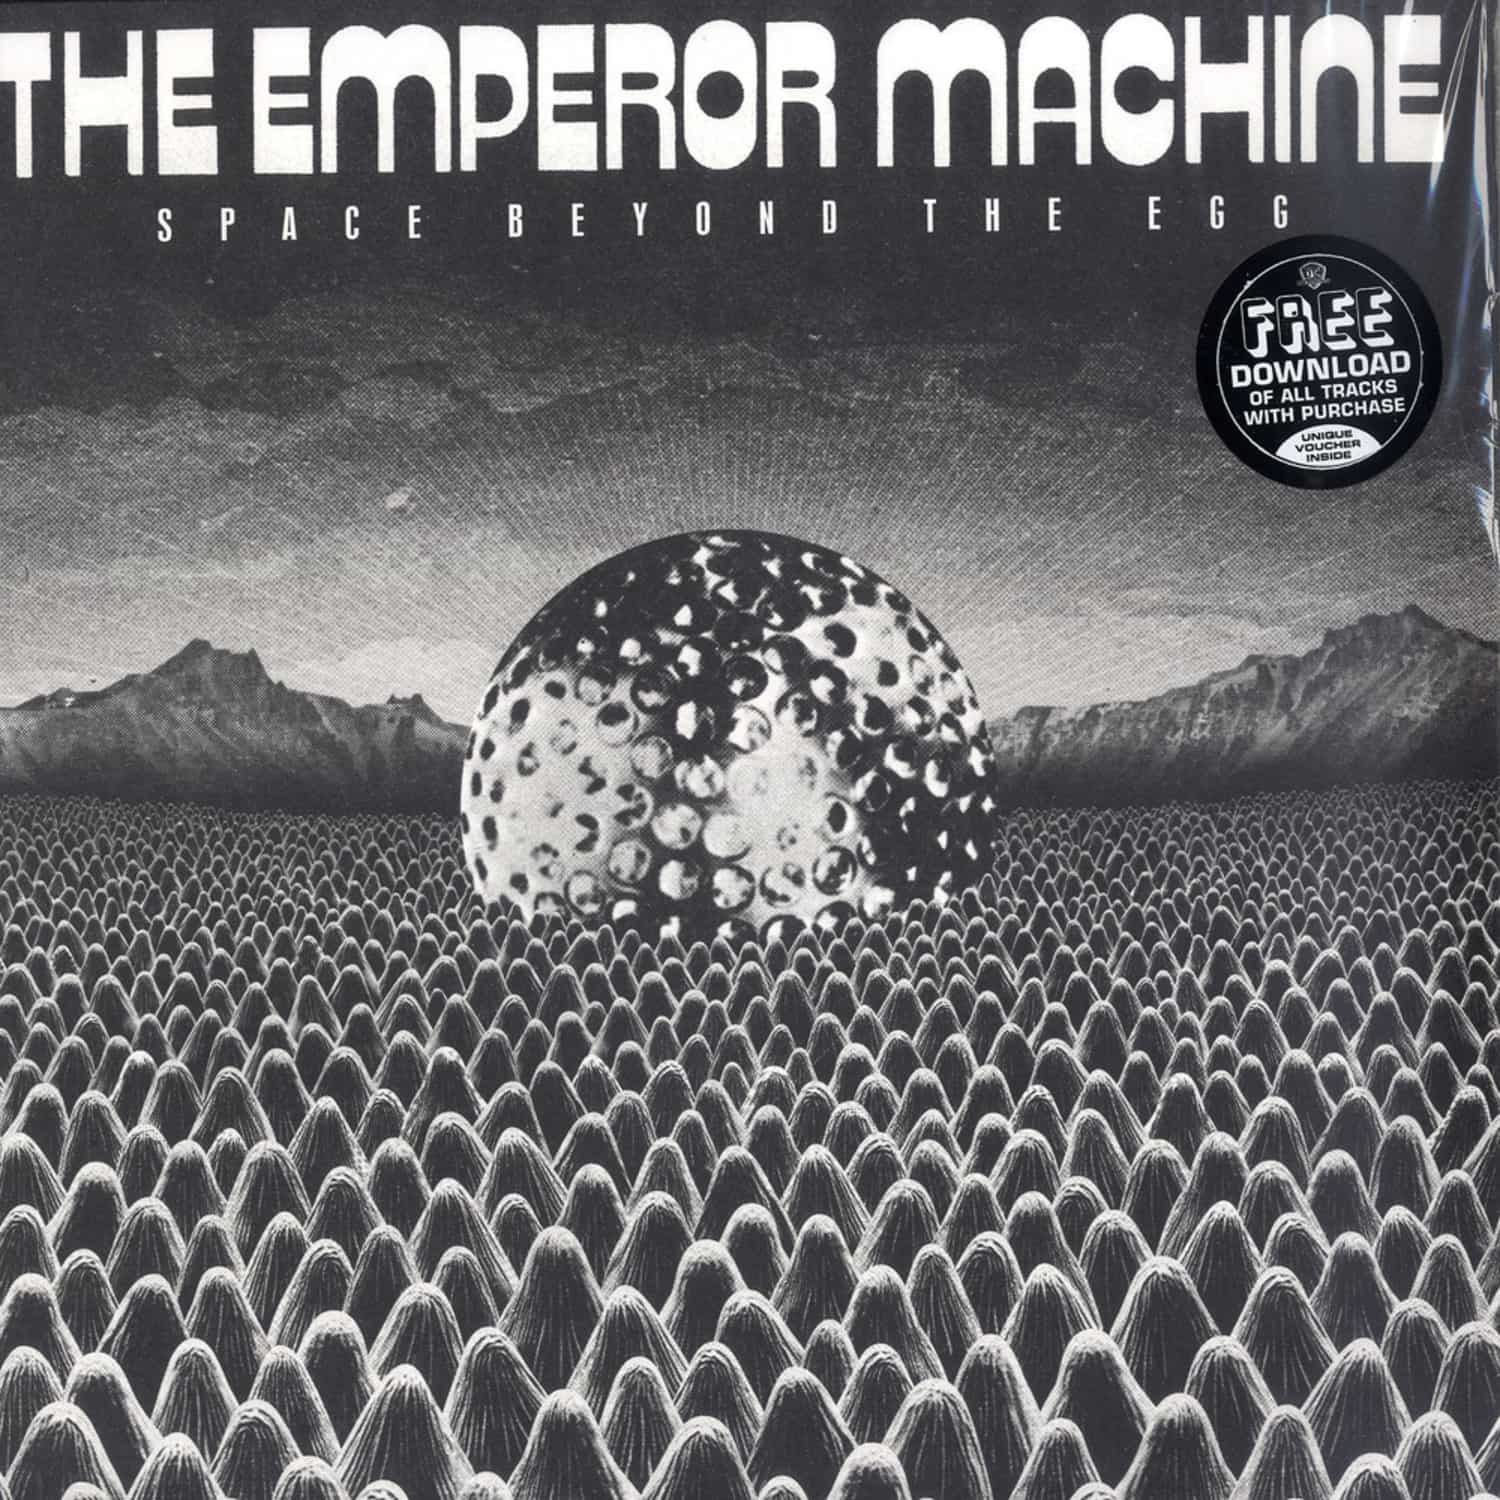 The Emperor Machine - SPACE BEYOND THE EGG 